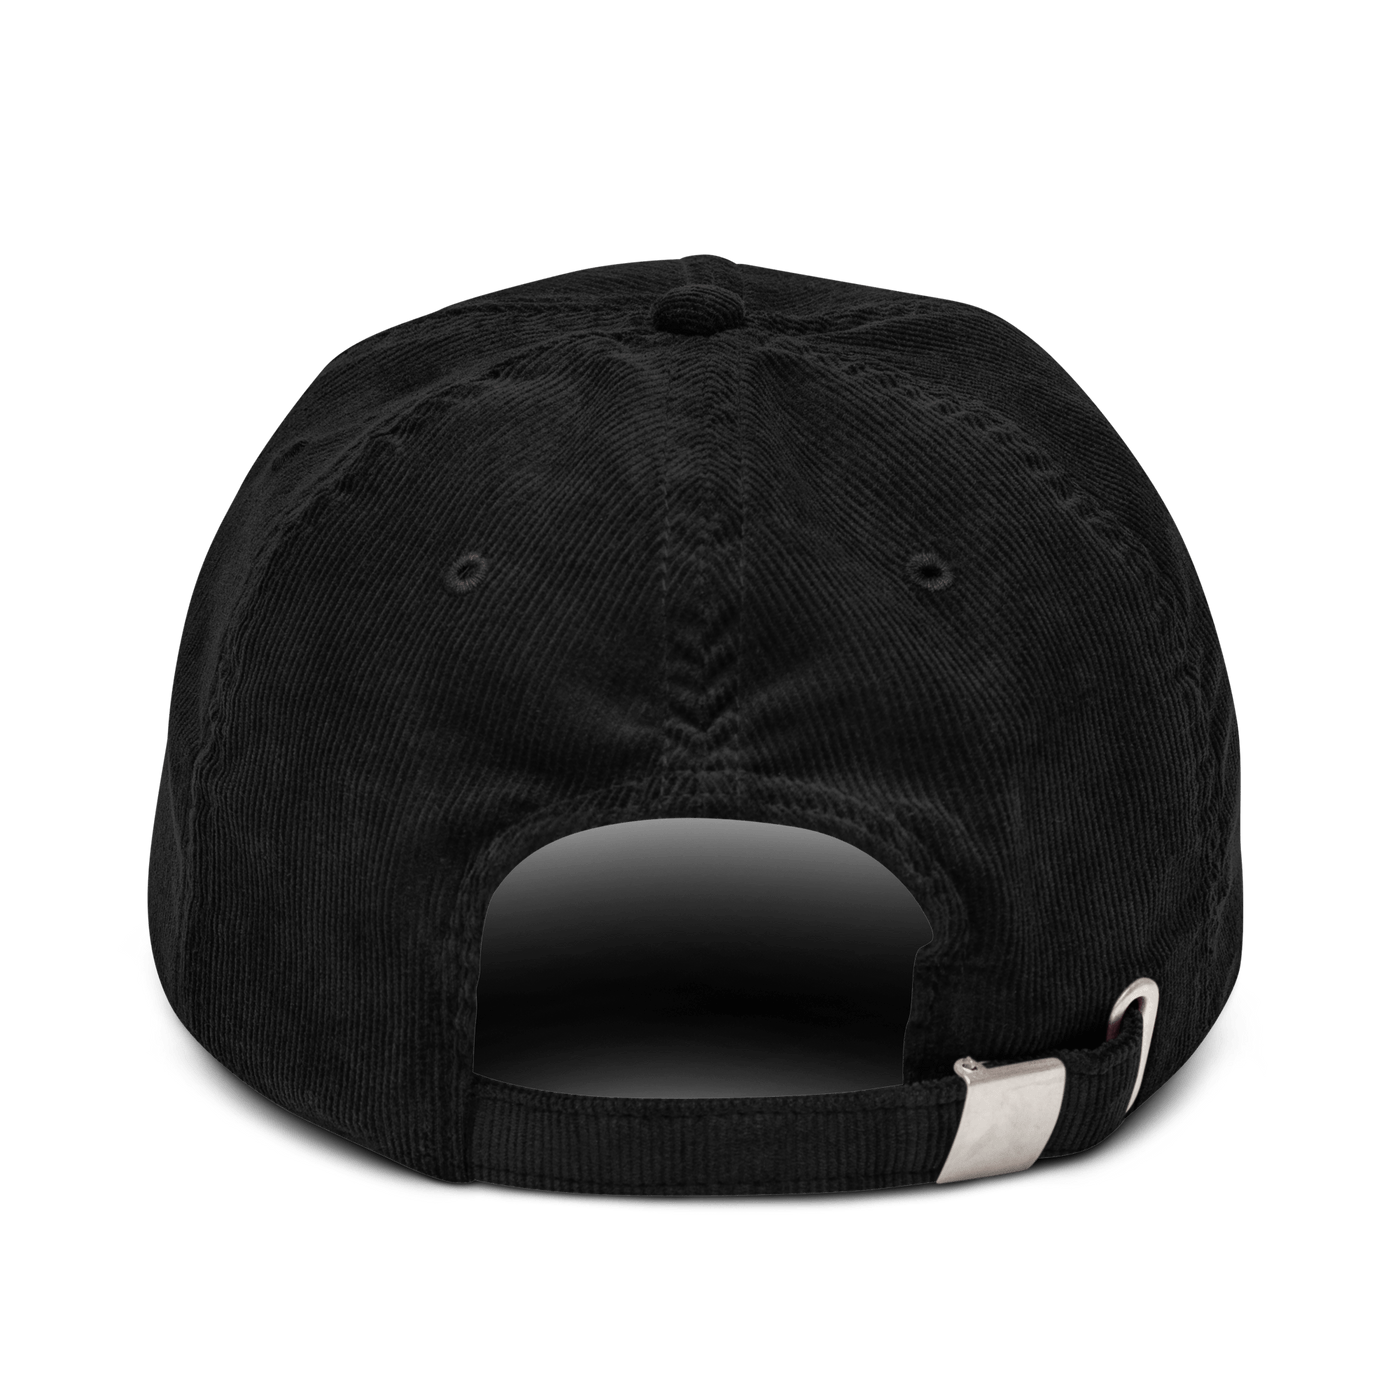 Life Happens Coffee Helps Corduroy hat - Black - - Just Another Cap Store